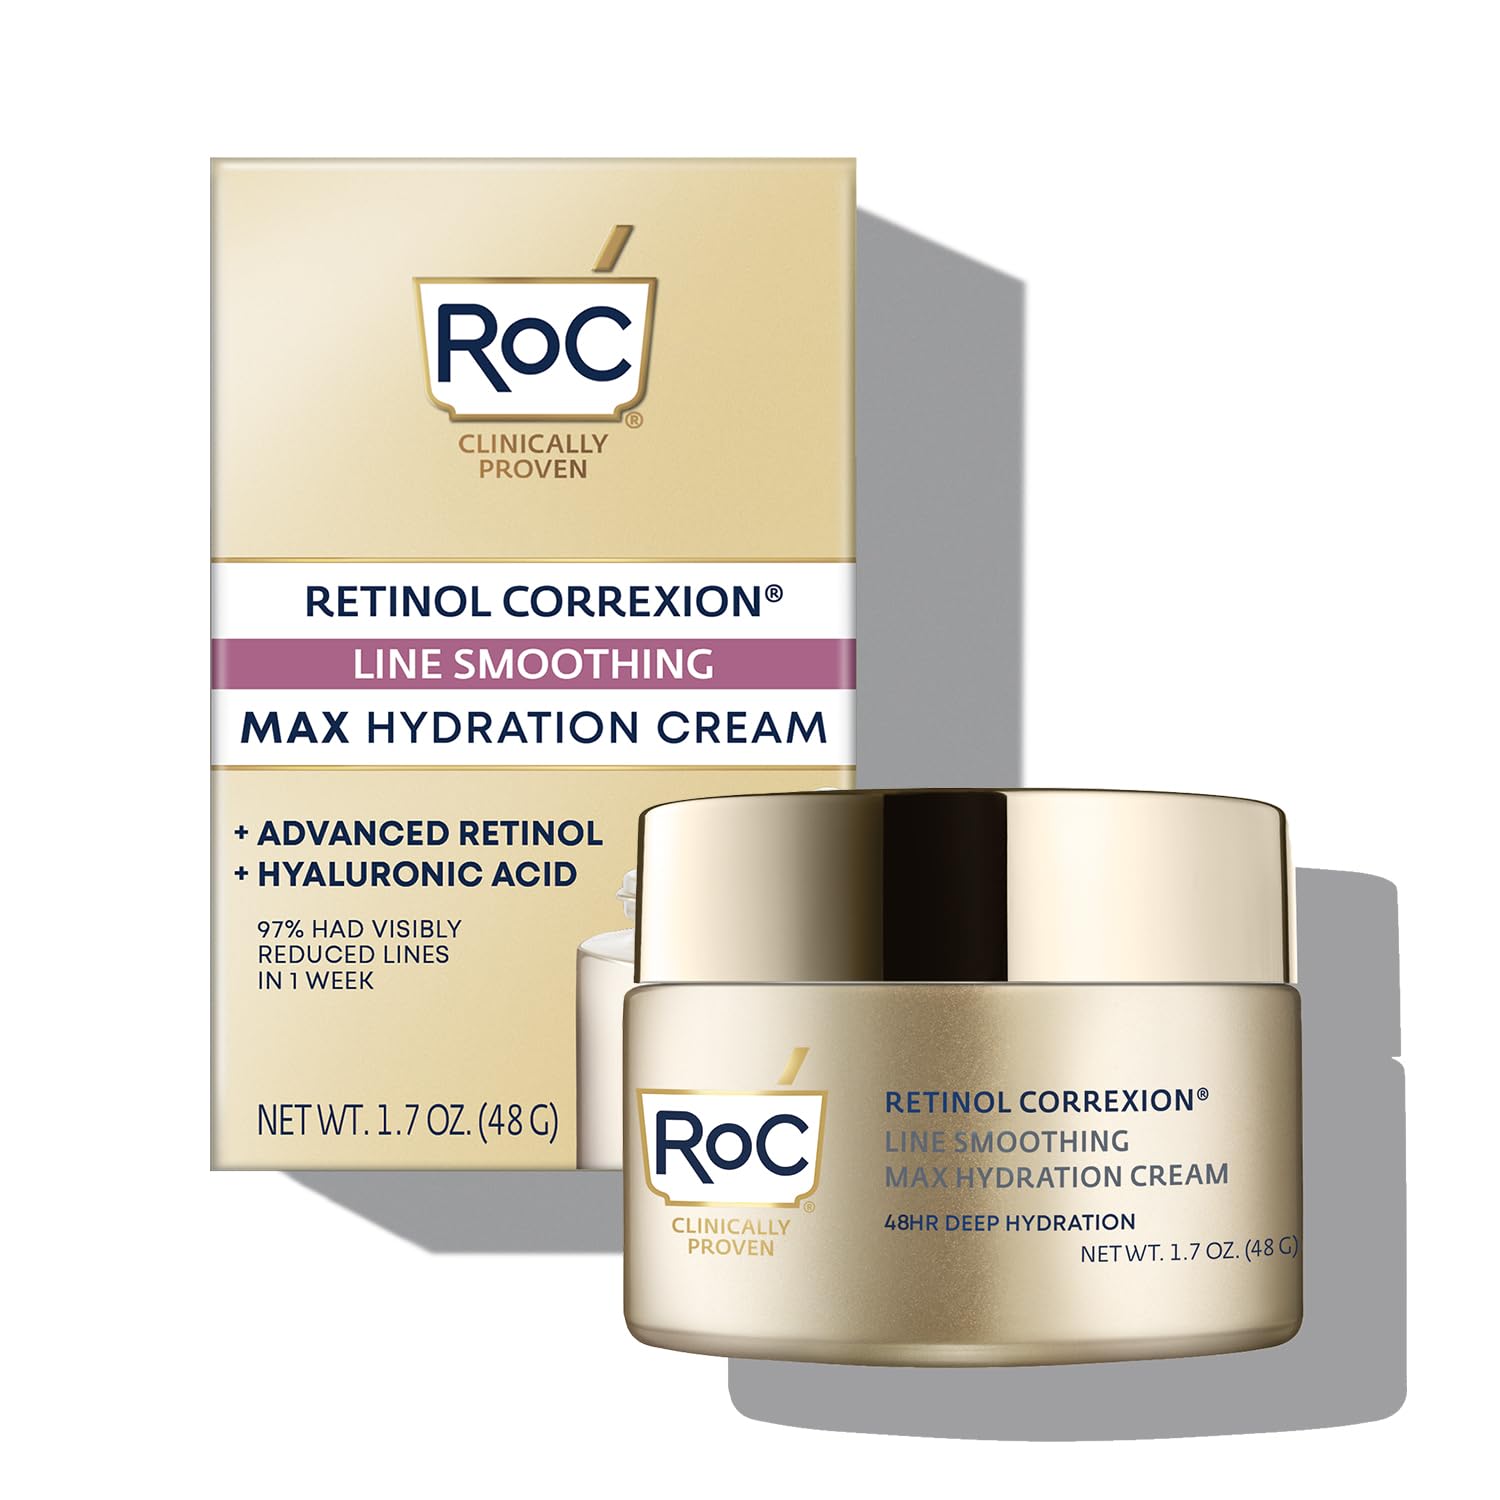 RoC Retinol Correxion Max Daily Hydration Anti-Aging Daily Face Moisturizer with Hyaluronic Acid, Oil Free Skin Care Cream for Fine Lines, Dark Spots, Post-Acne Scars, 1.7 oz (Packaging May Vary)